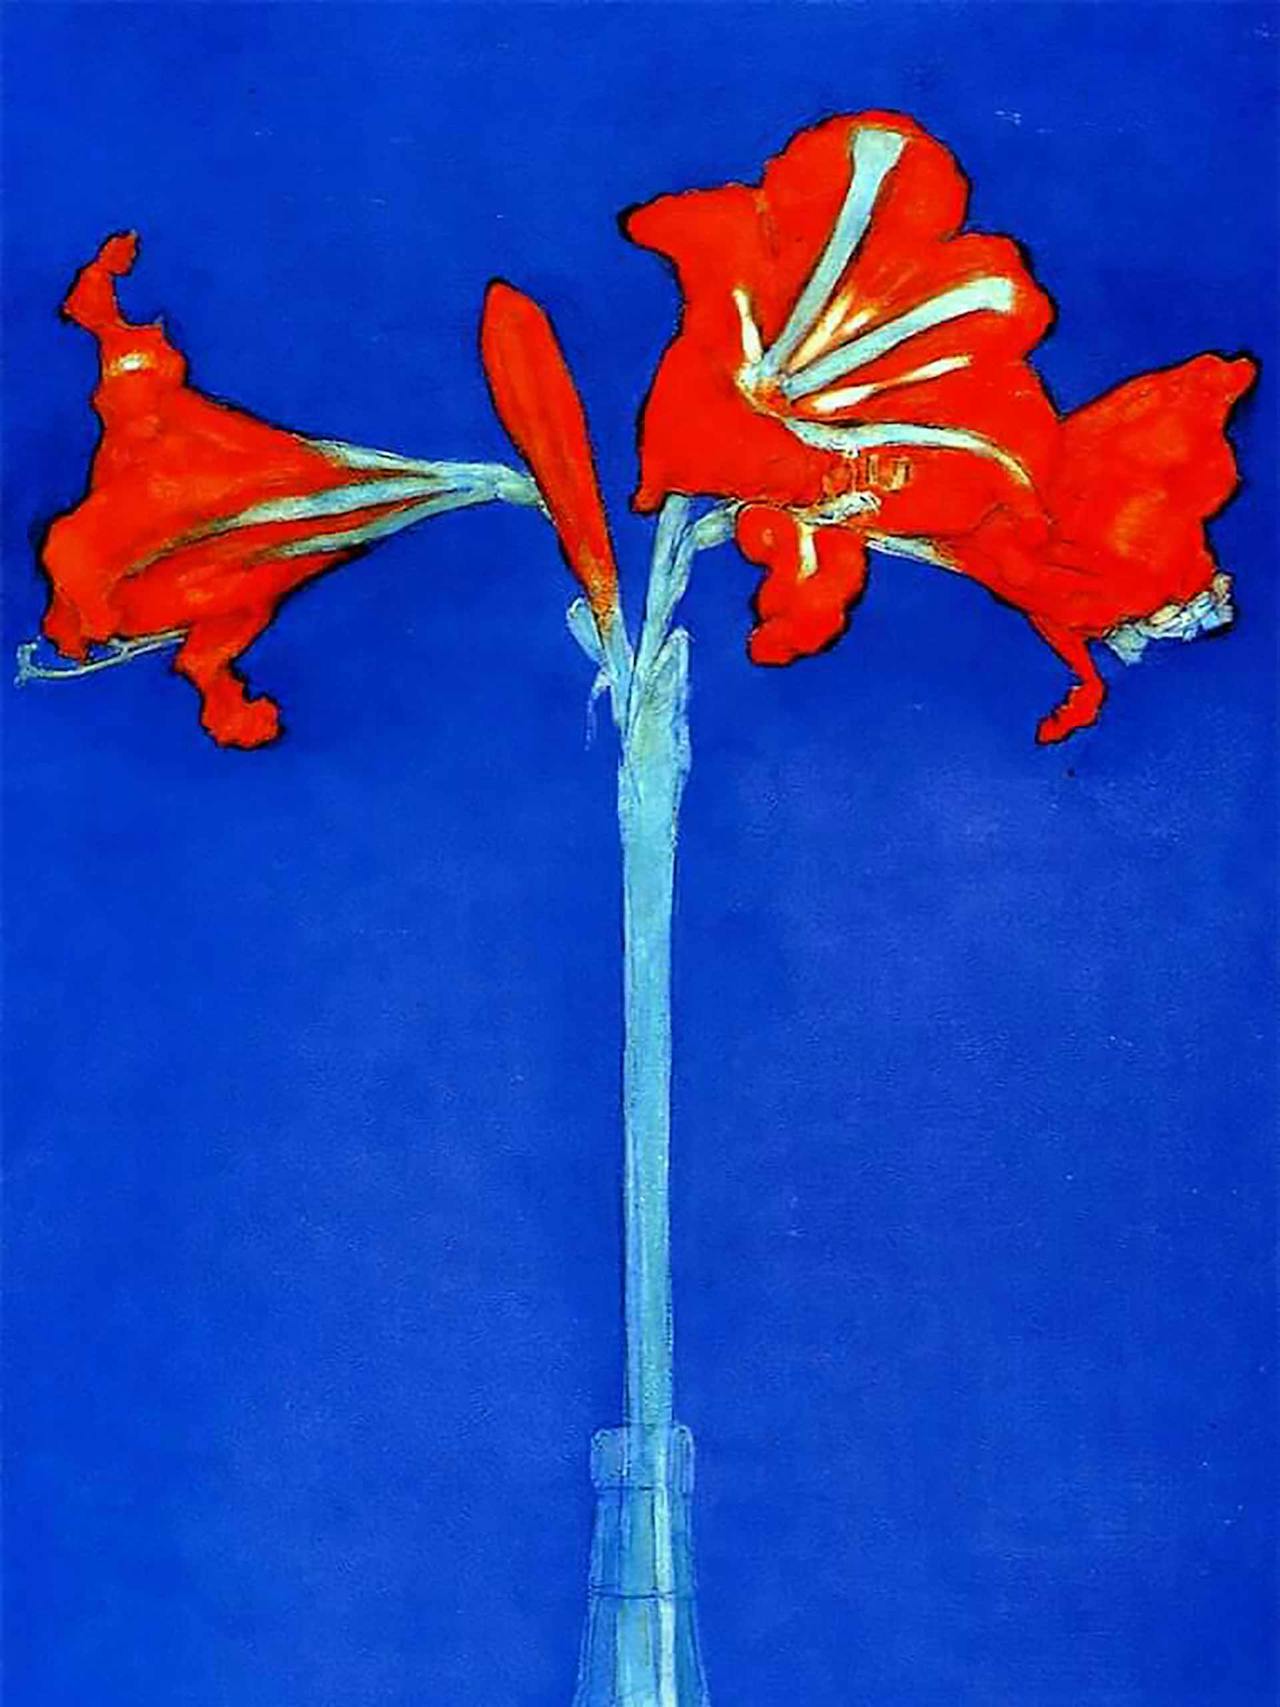 Image: Piet Mondrian, Red Amaryllis with blue background, 1909–1910. Private Collection